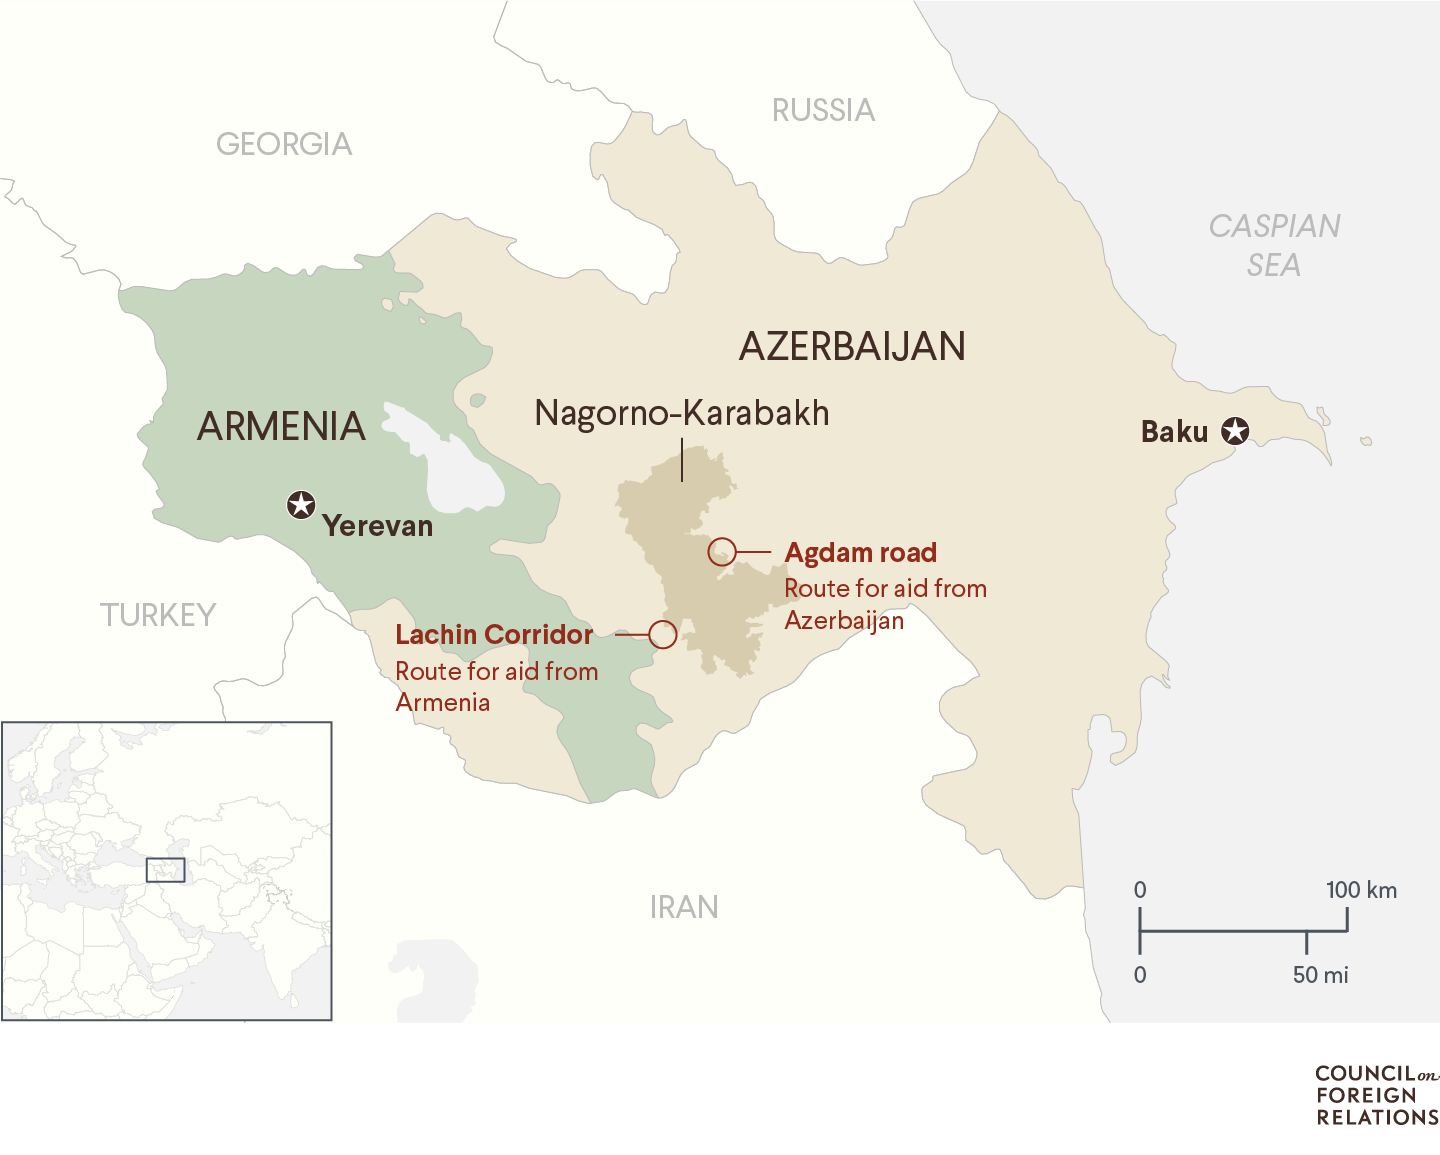 Armenia-Azerbaijan Conflict Shows Signs of Escalation - The New York Times